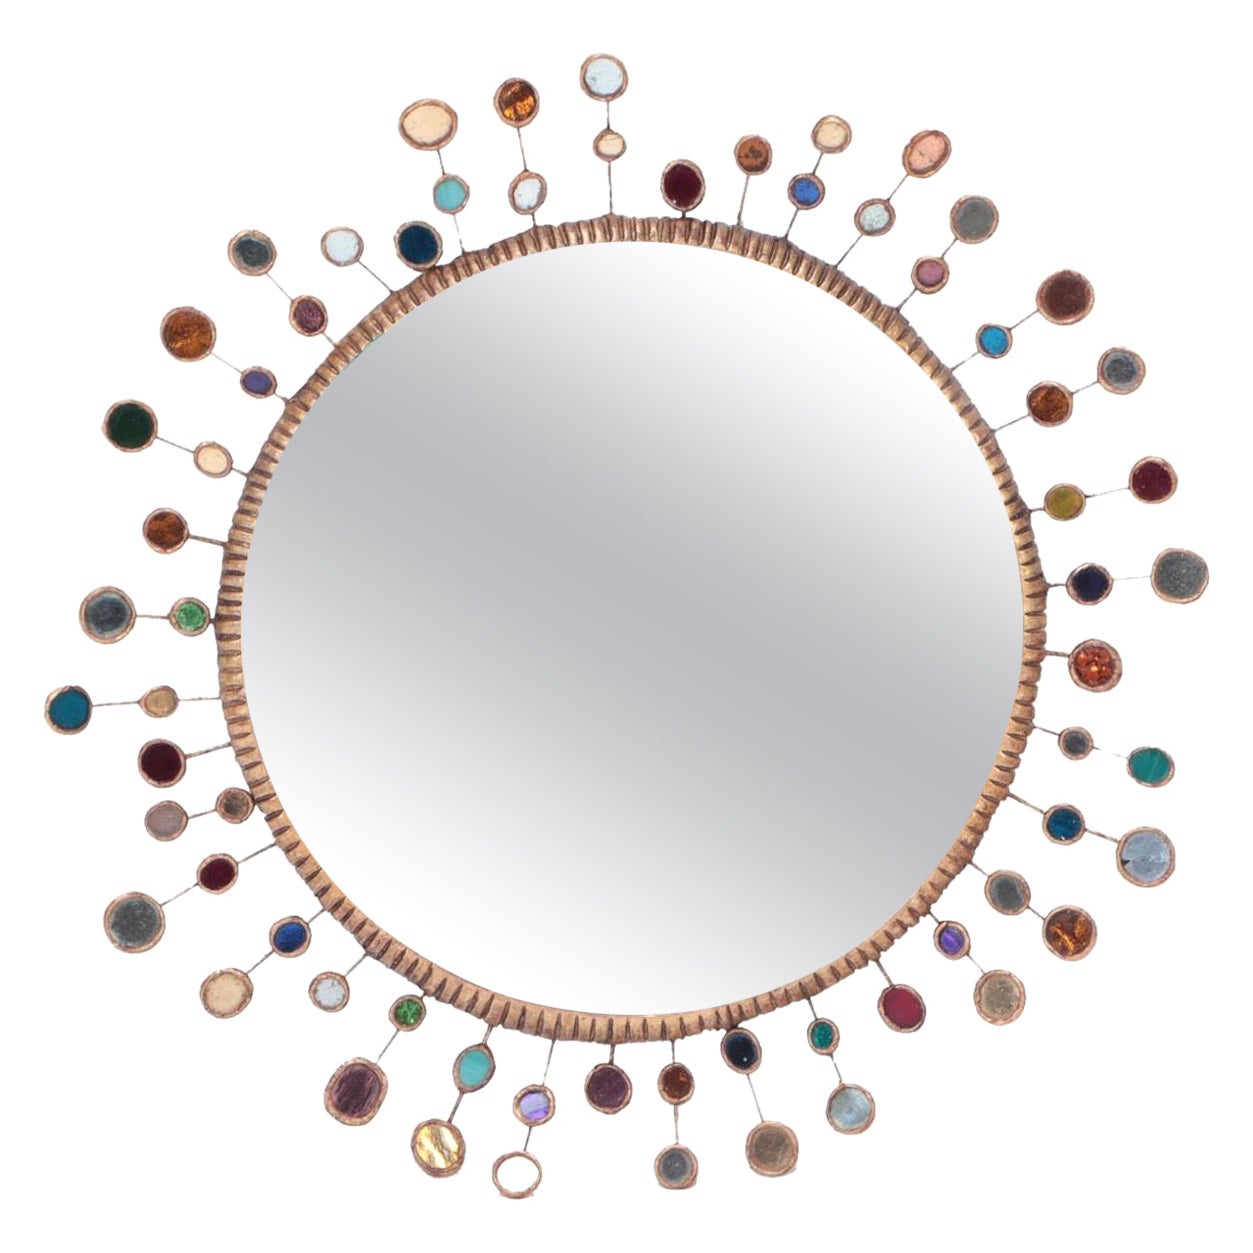 A Line Vautrin style multi-colored glass mirror. One of a pair. Contemporary